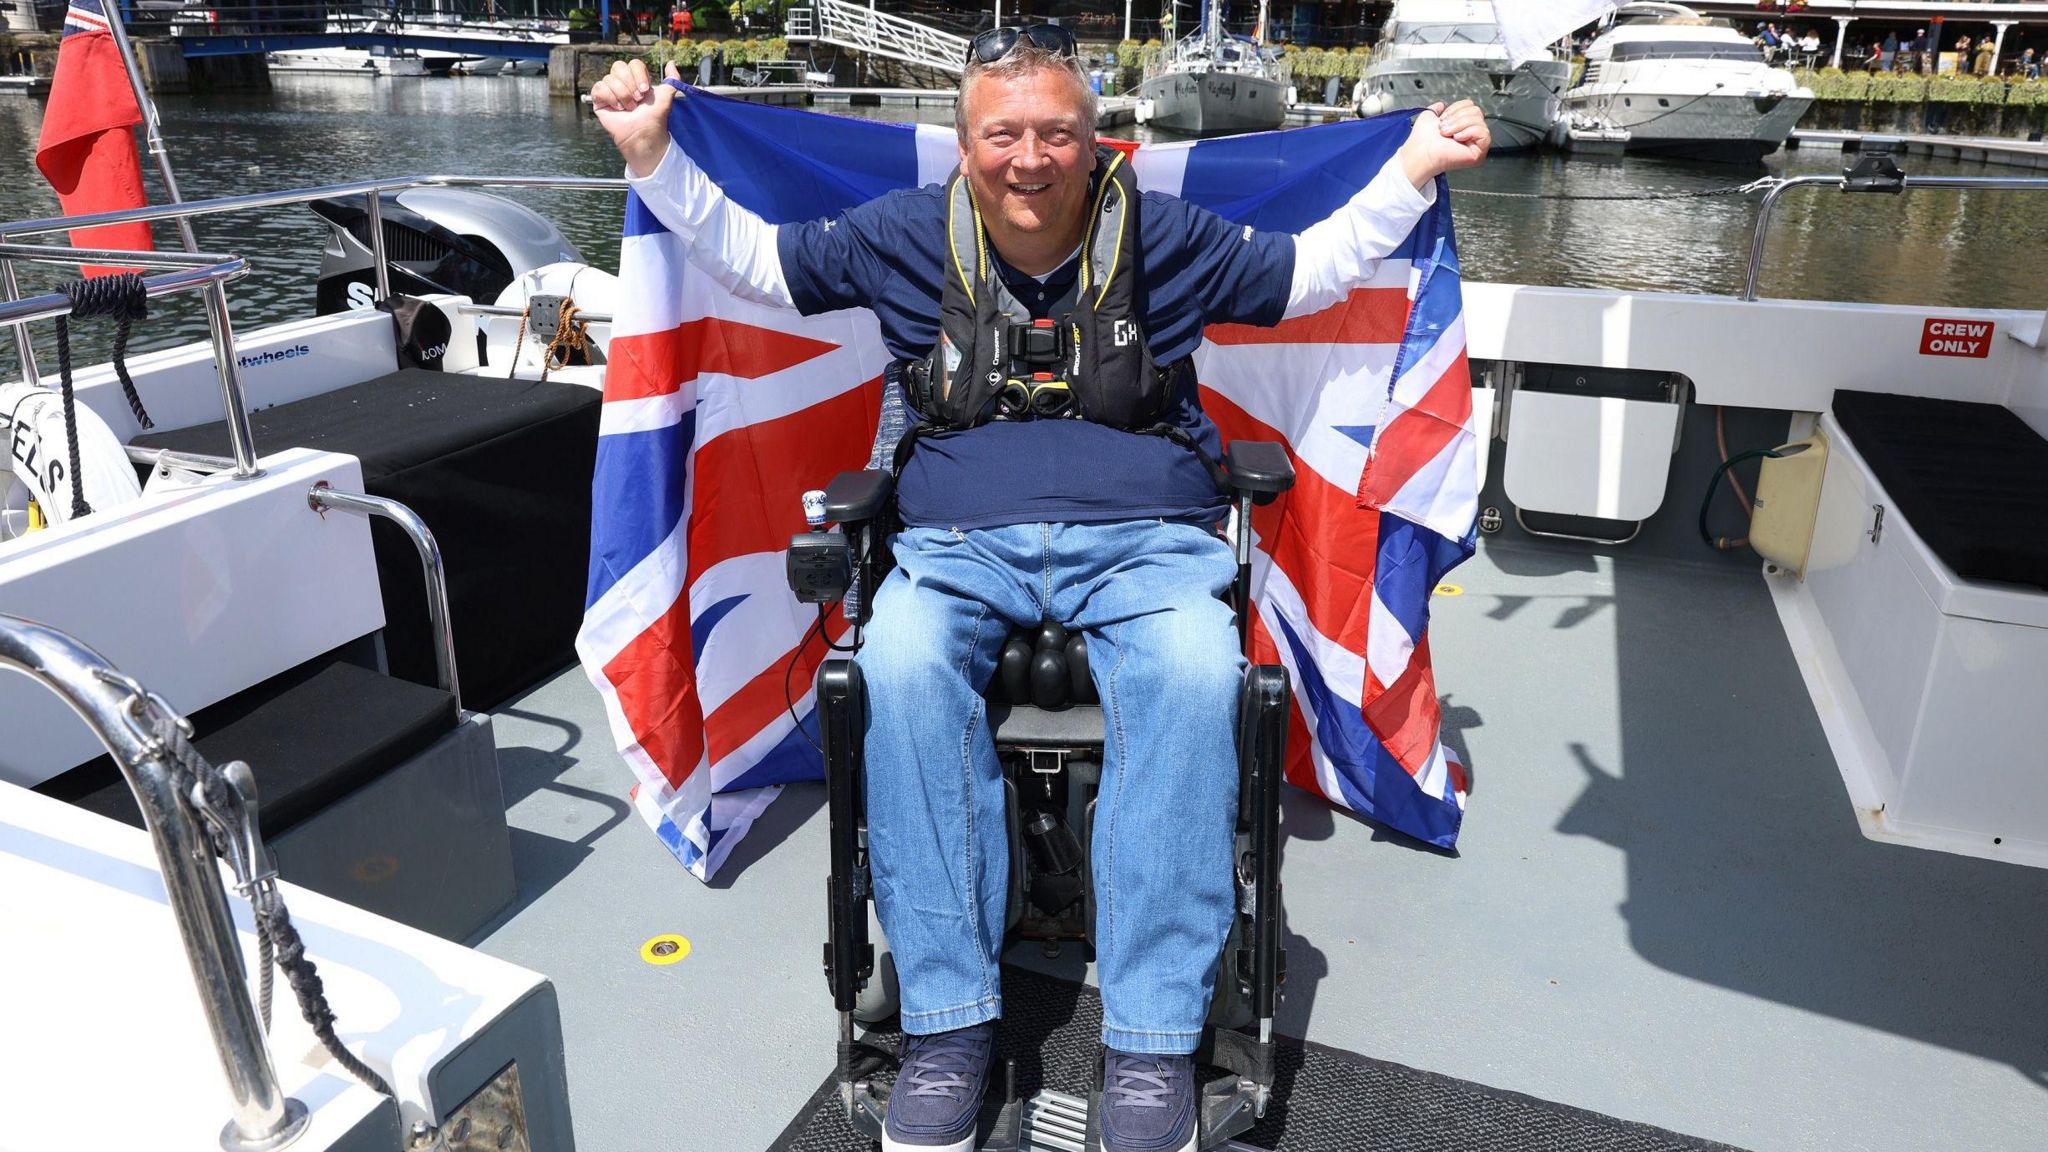 A man in a wheelchair on the back of a boat wearing a life jacket smiling and holding up a union jack